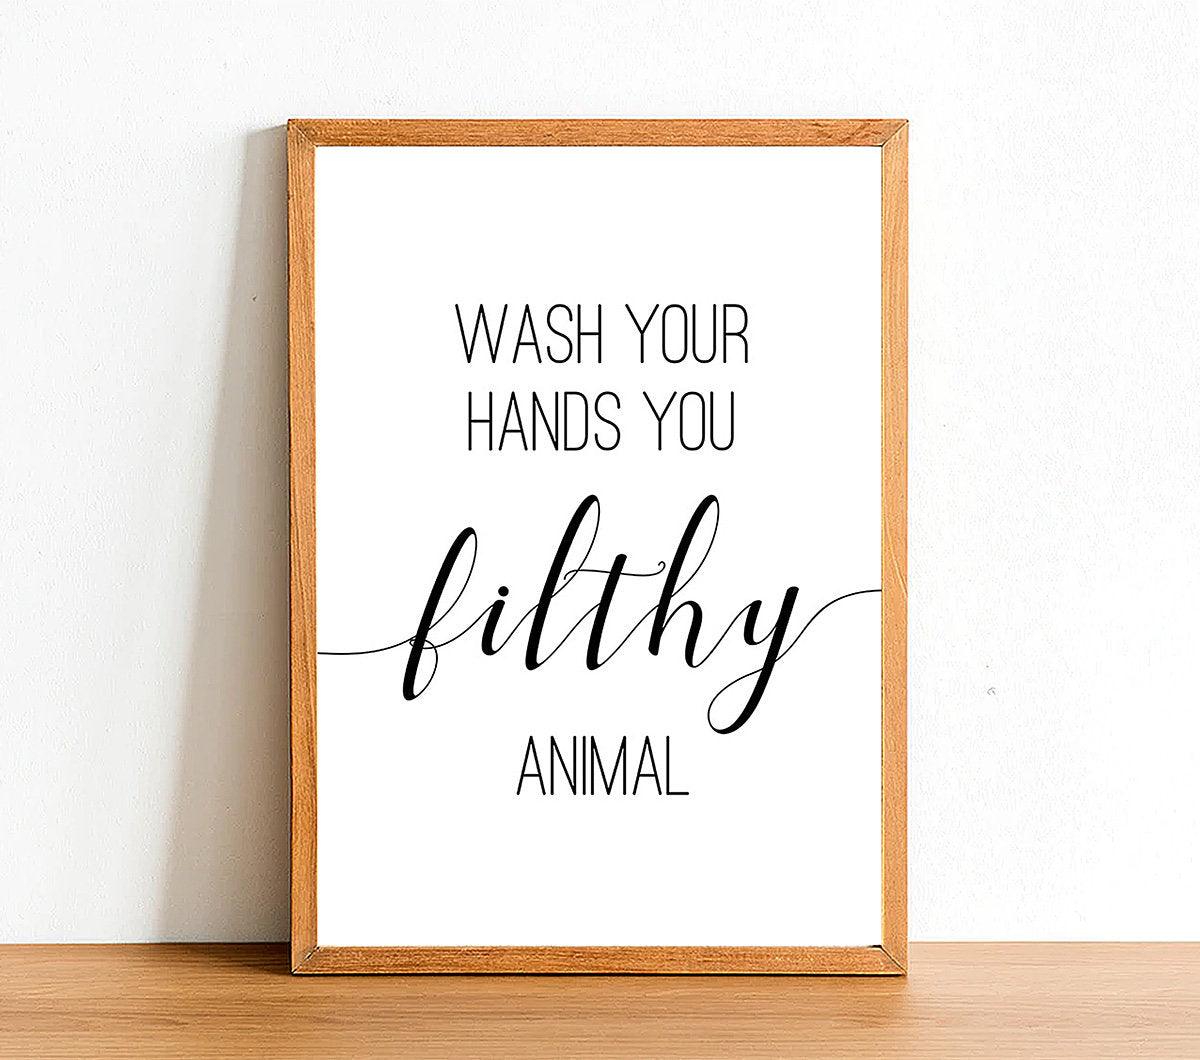 Wash Your Hands You Filthy Animal - Bathroom Poster - Classic Posters